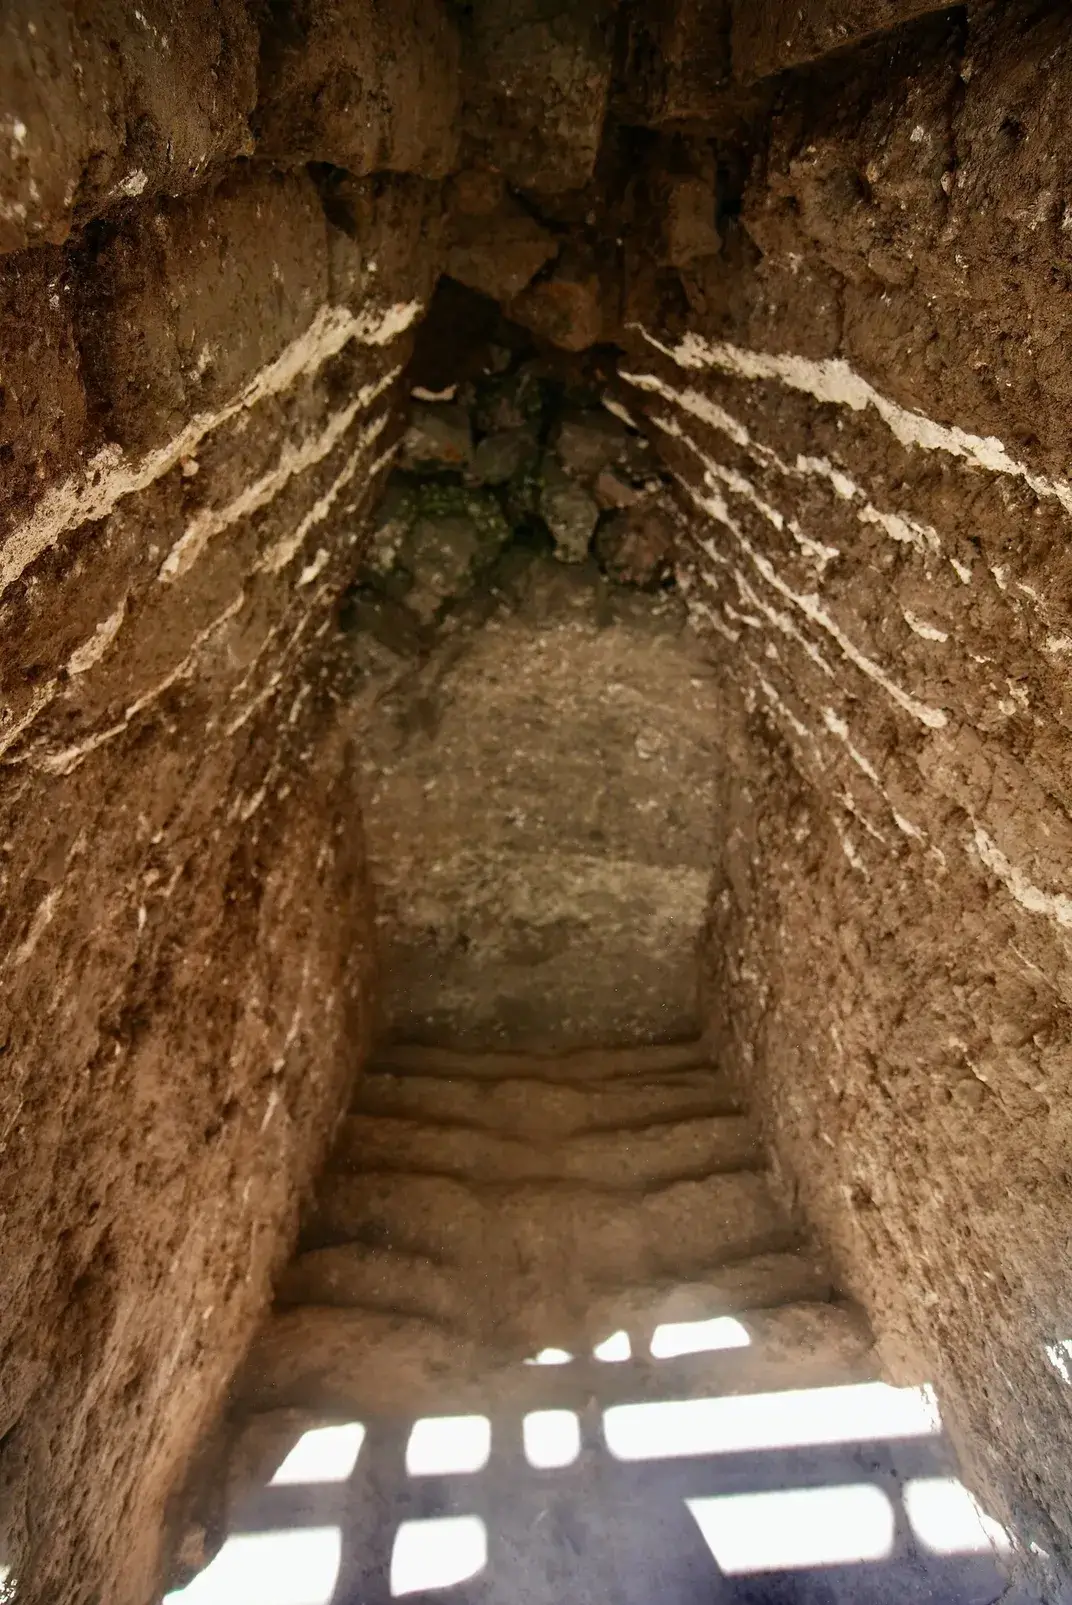 The brick corbelled arch hangs over a corridor inside of the structure found at Tel Shimron. Eyecon